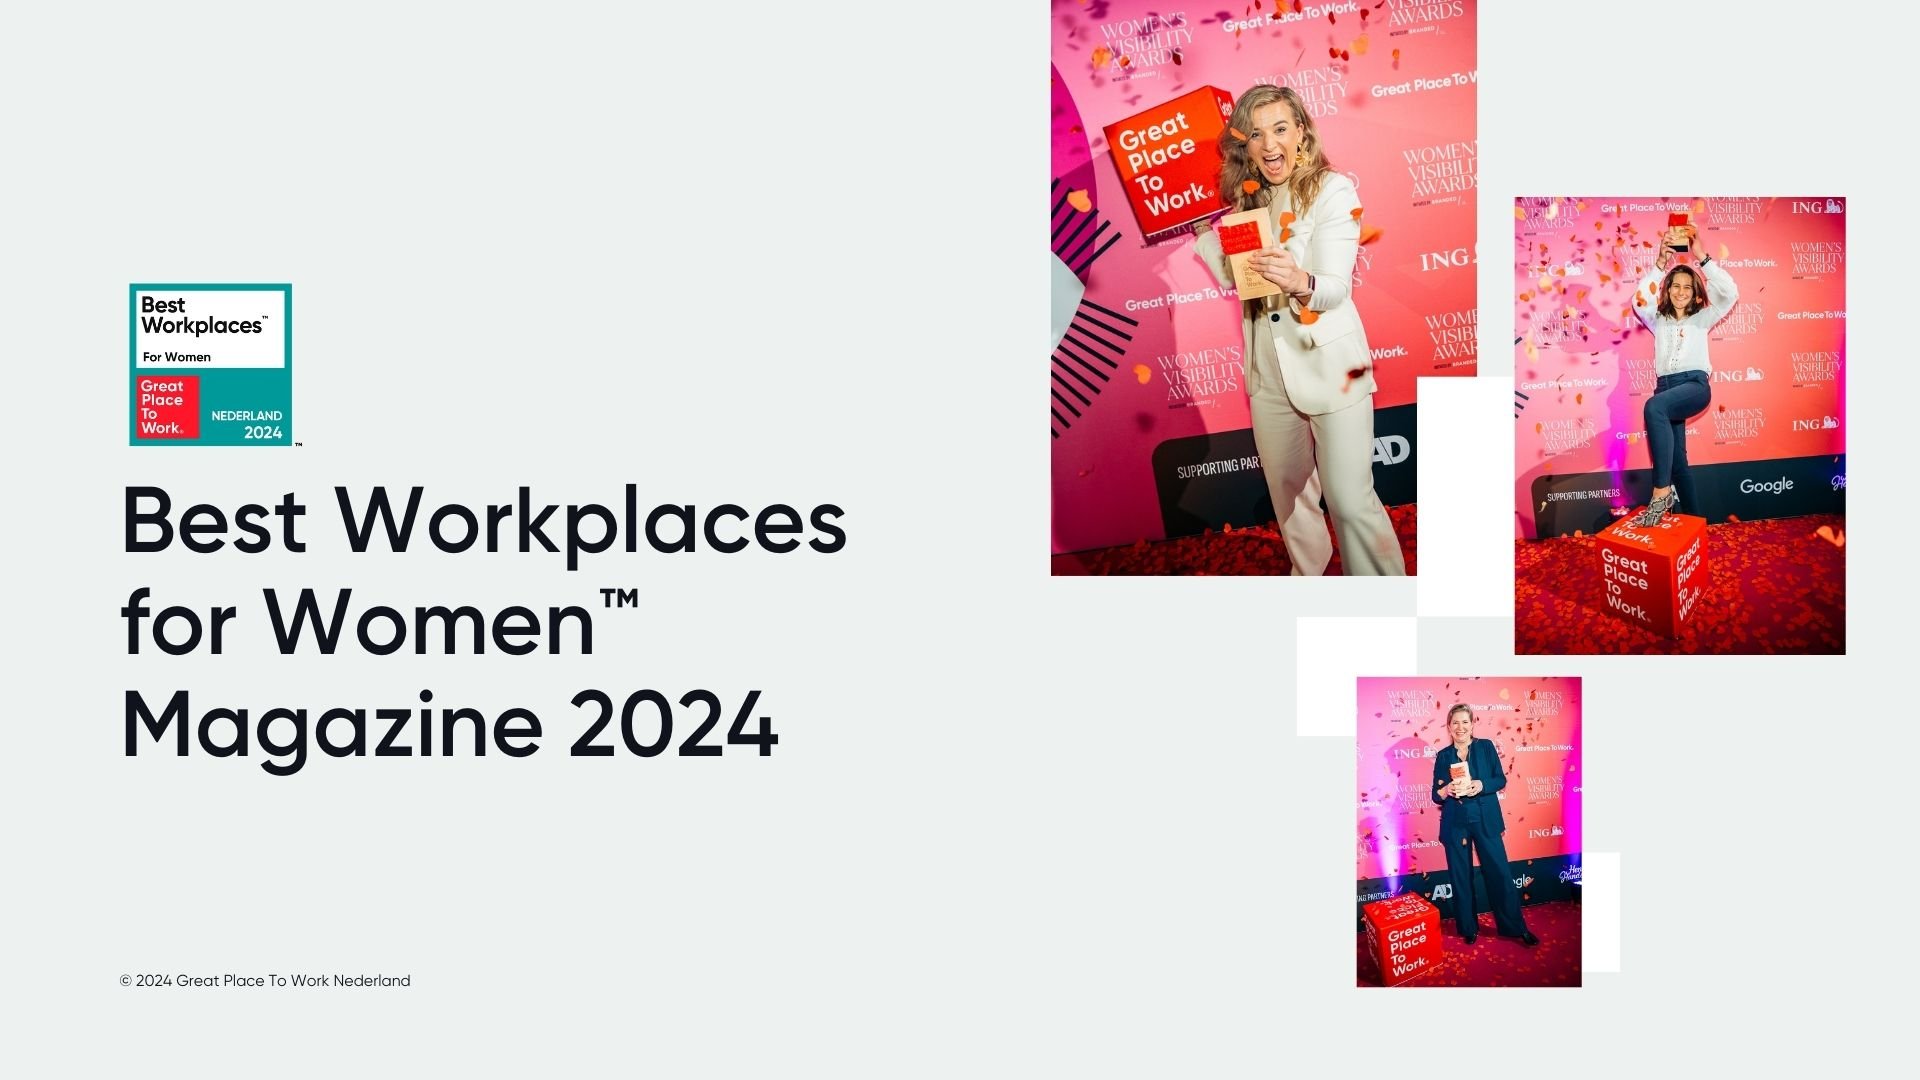 Best Workplaces for Women Magazine 2024